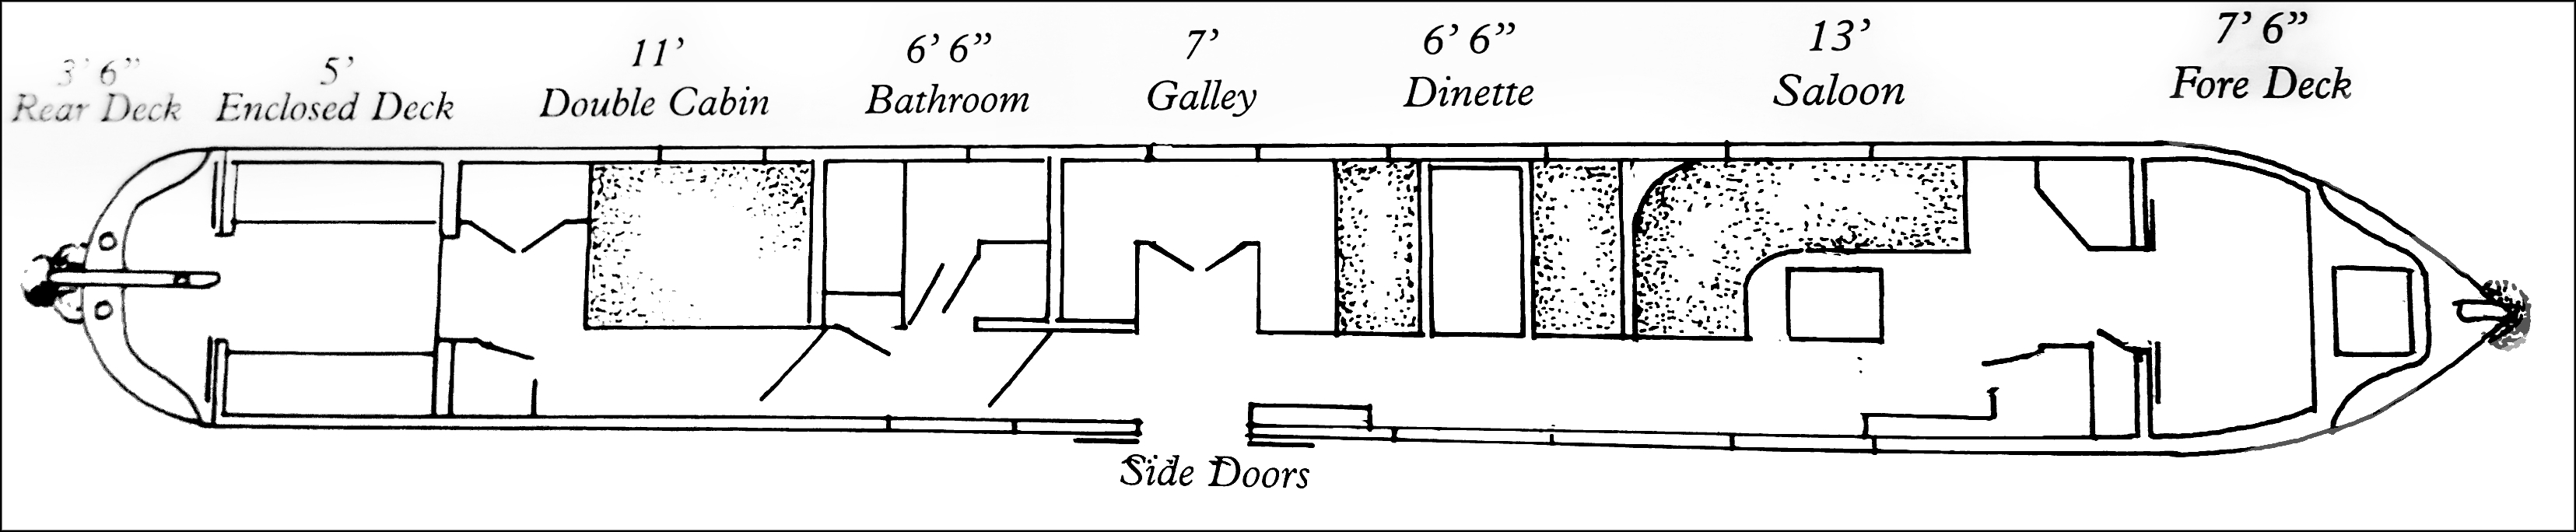 A plan of Vulcan, showing fore and aft decks, sleeping areas, seating areas, washroom, and kitchen.